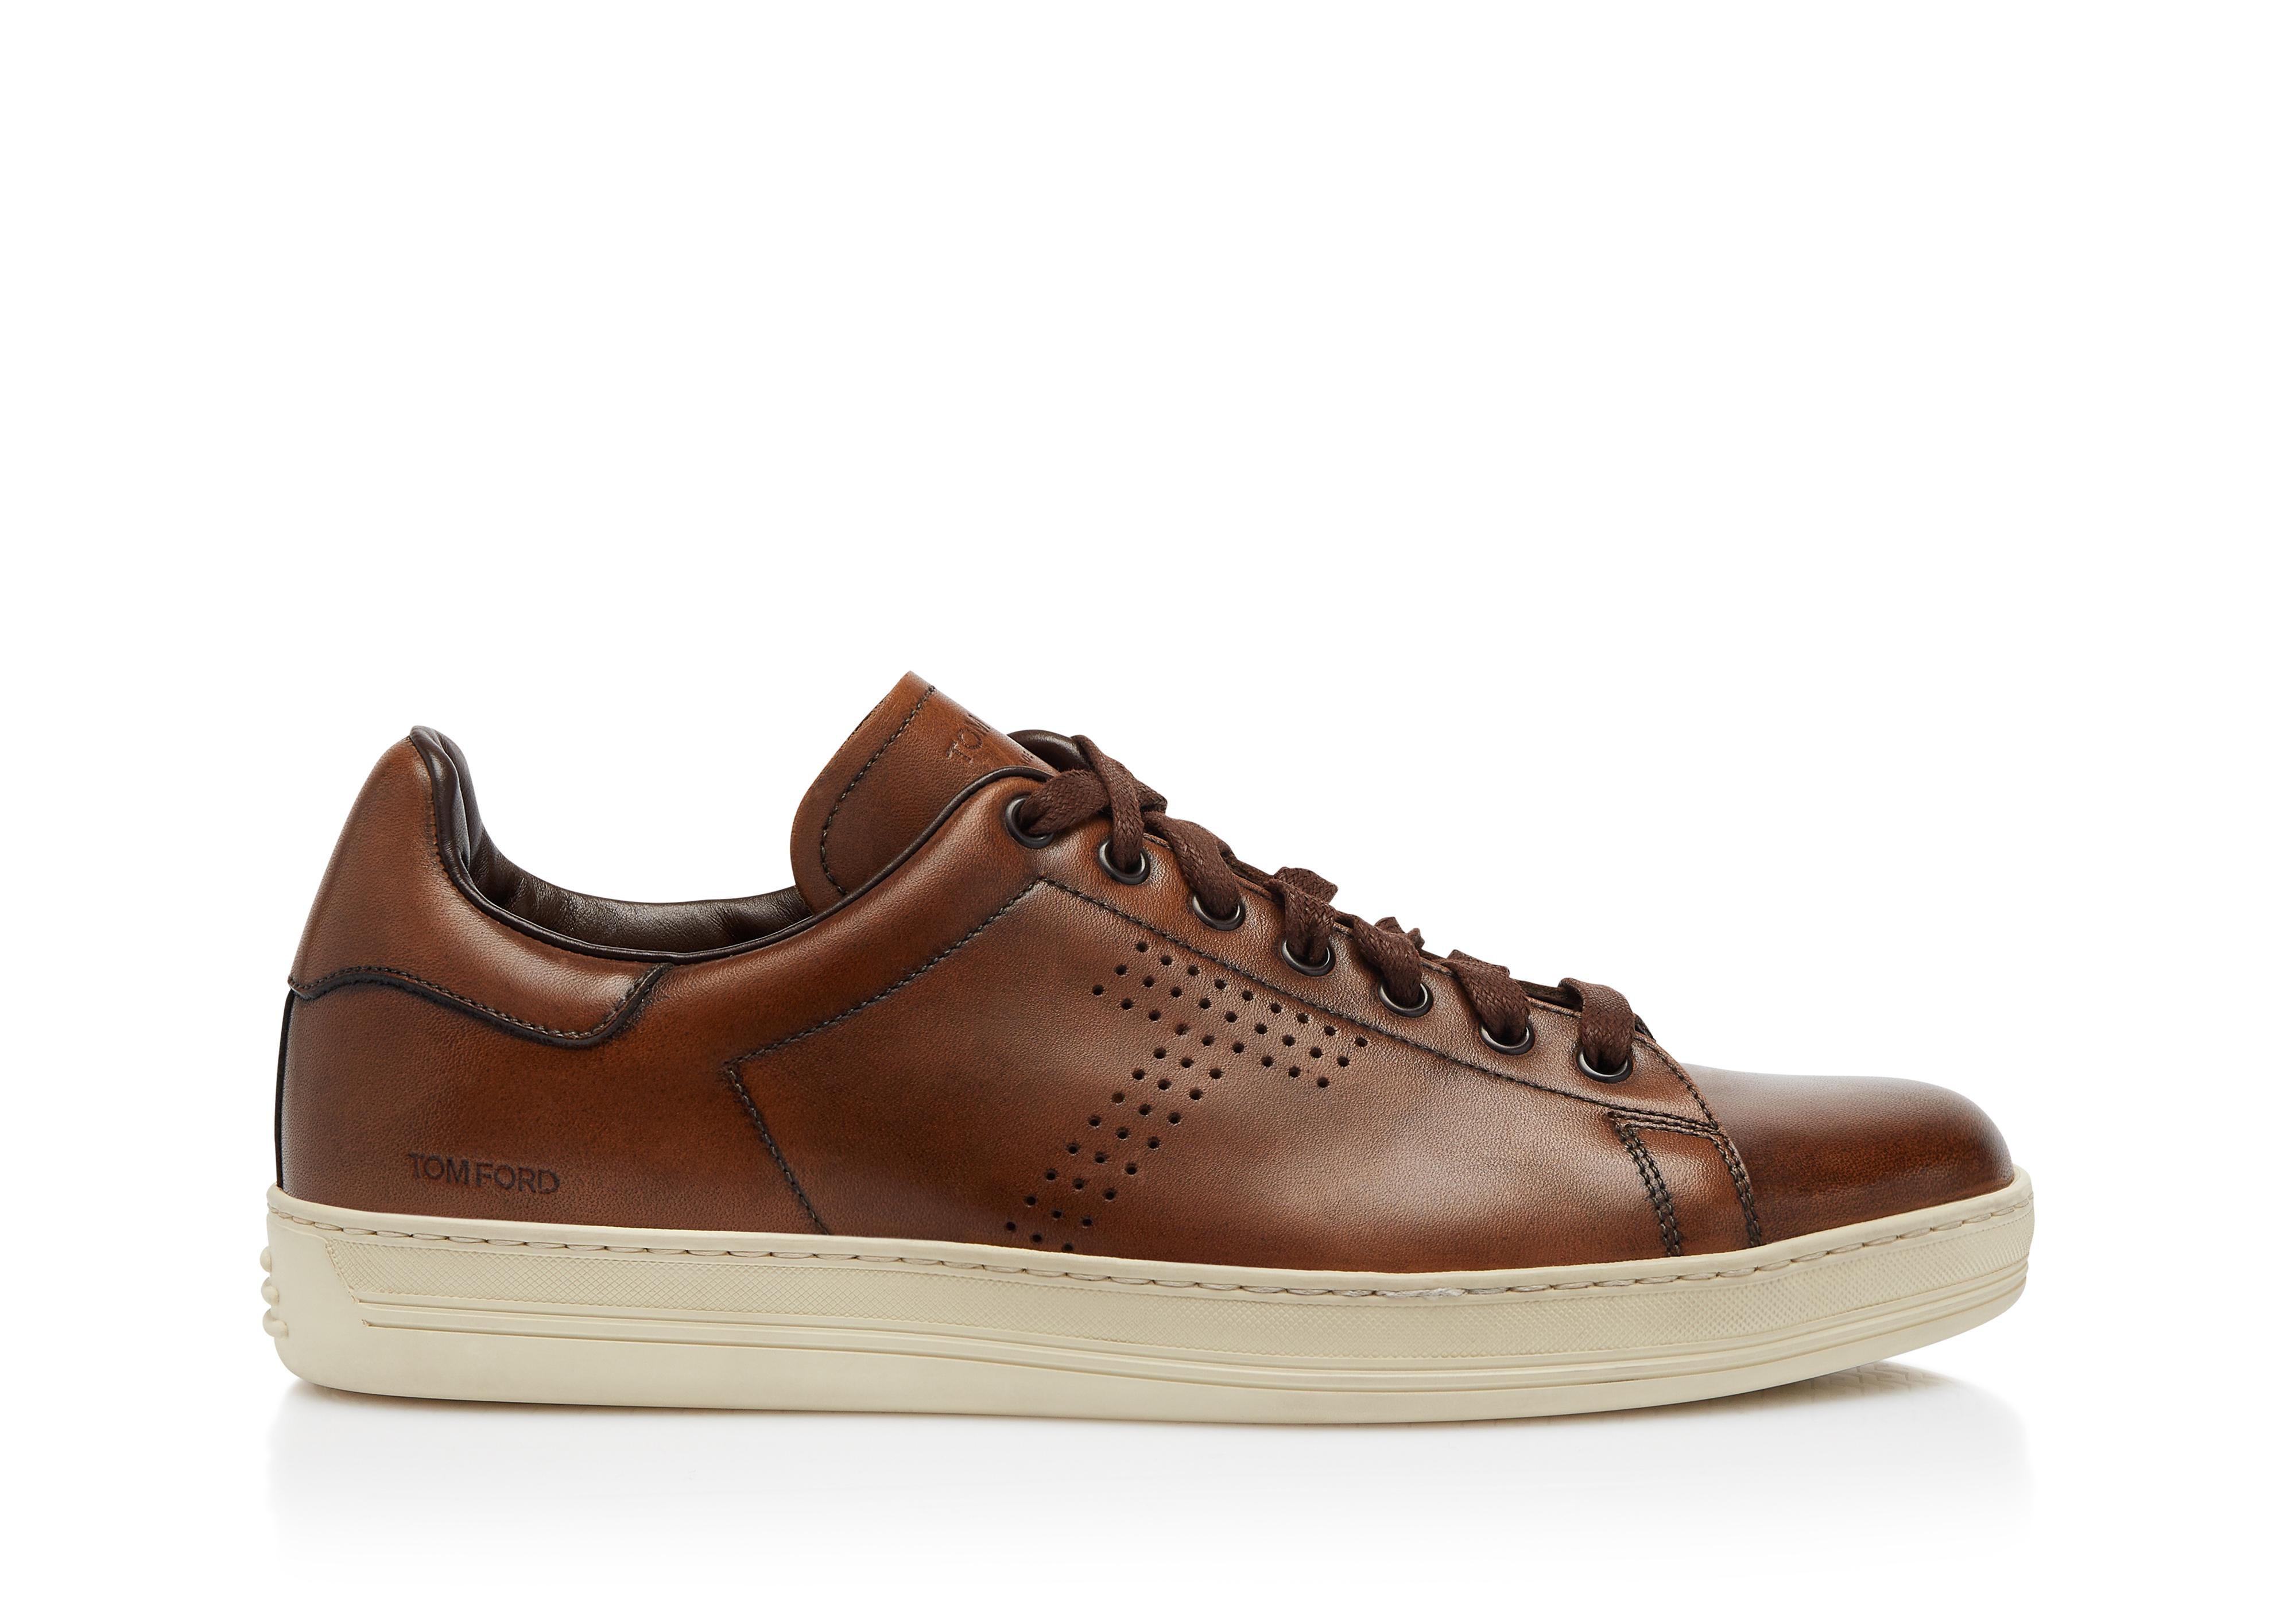 Tom Ford WARWICK BURNISHED LEATHER SNEAKERS 